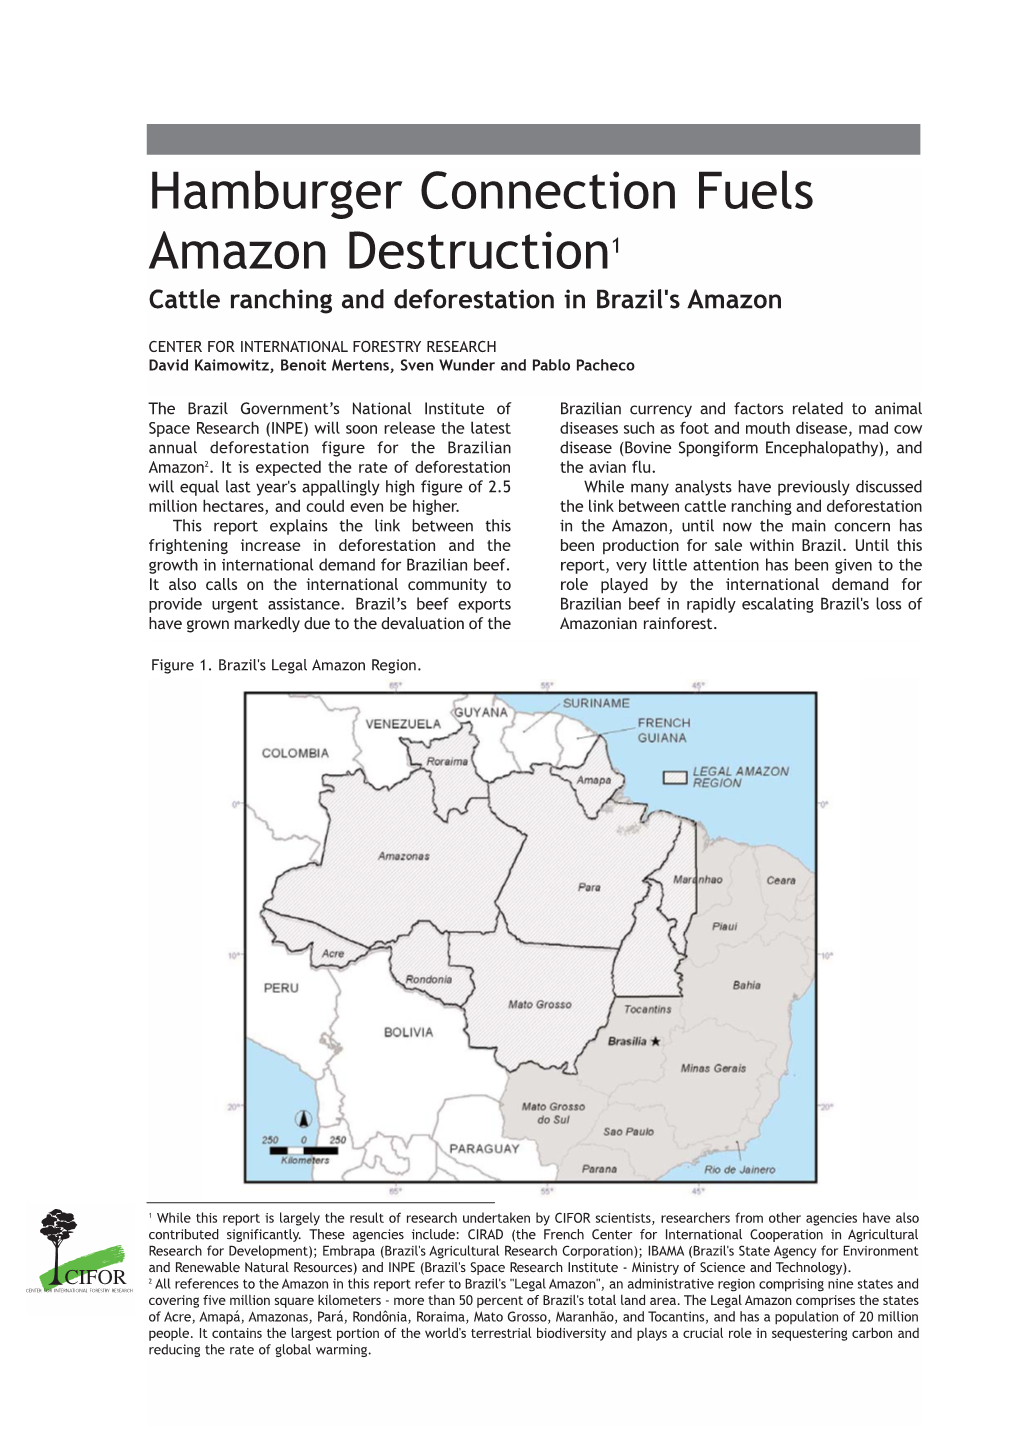 Cattle Ranching and Deforestation in Brazil's Amazon